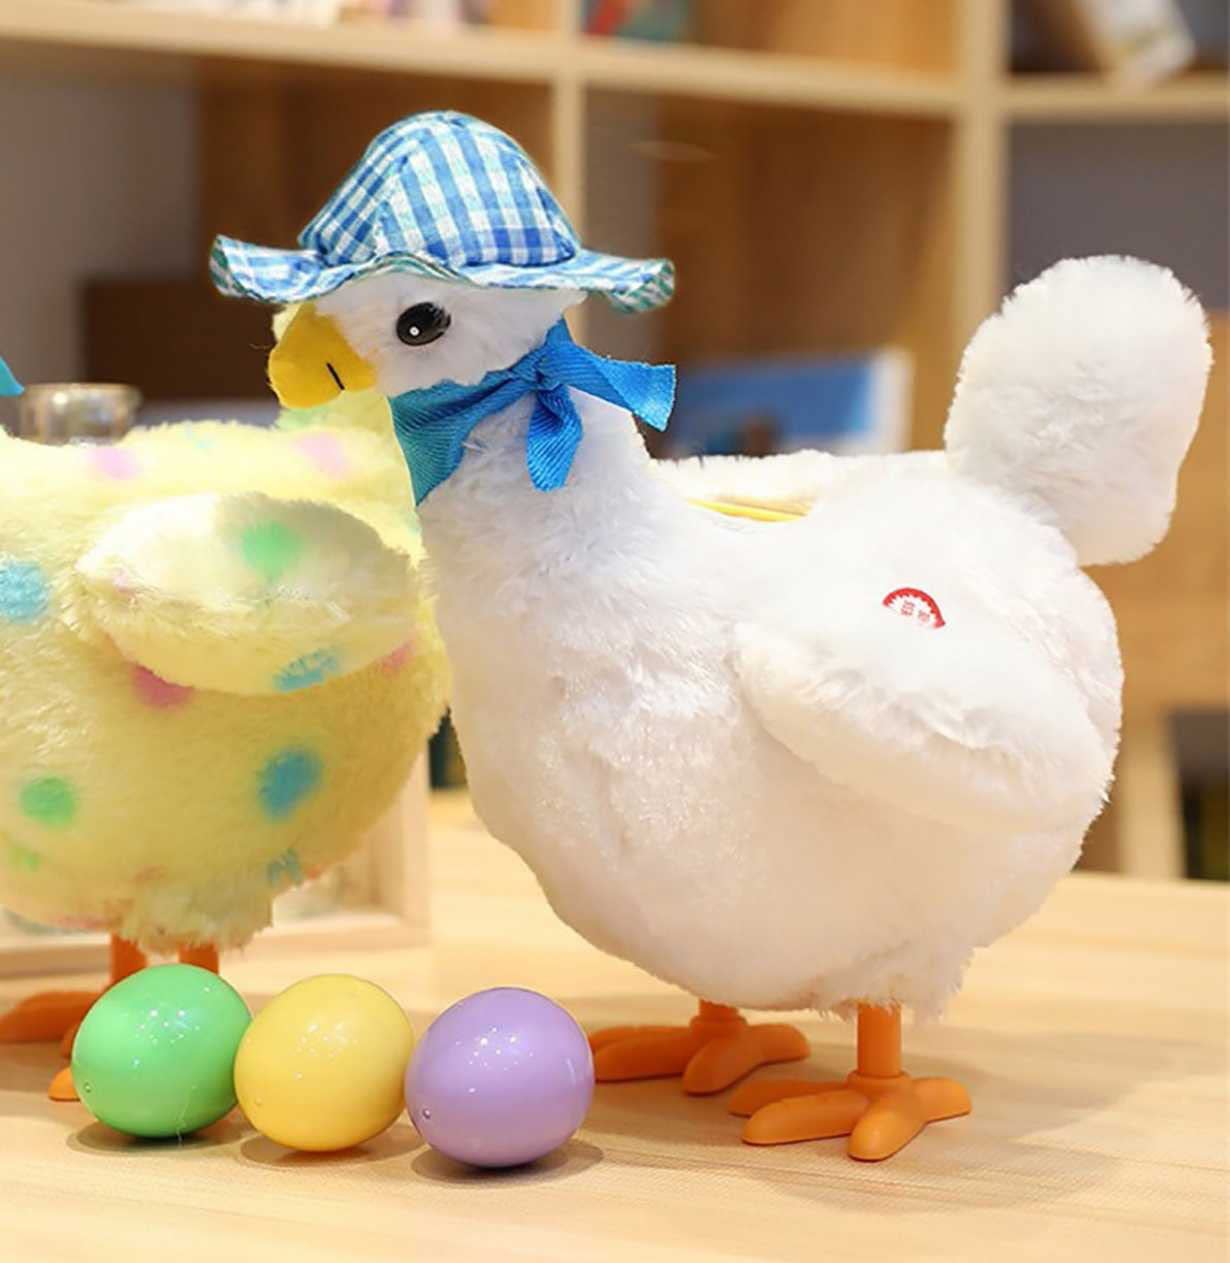 Mama Hen Laying Eggs Chicken Toy Surprise Baby Kids Fun FREE SHIPPING 